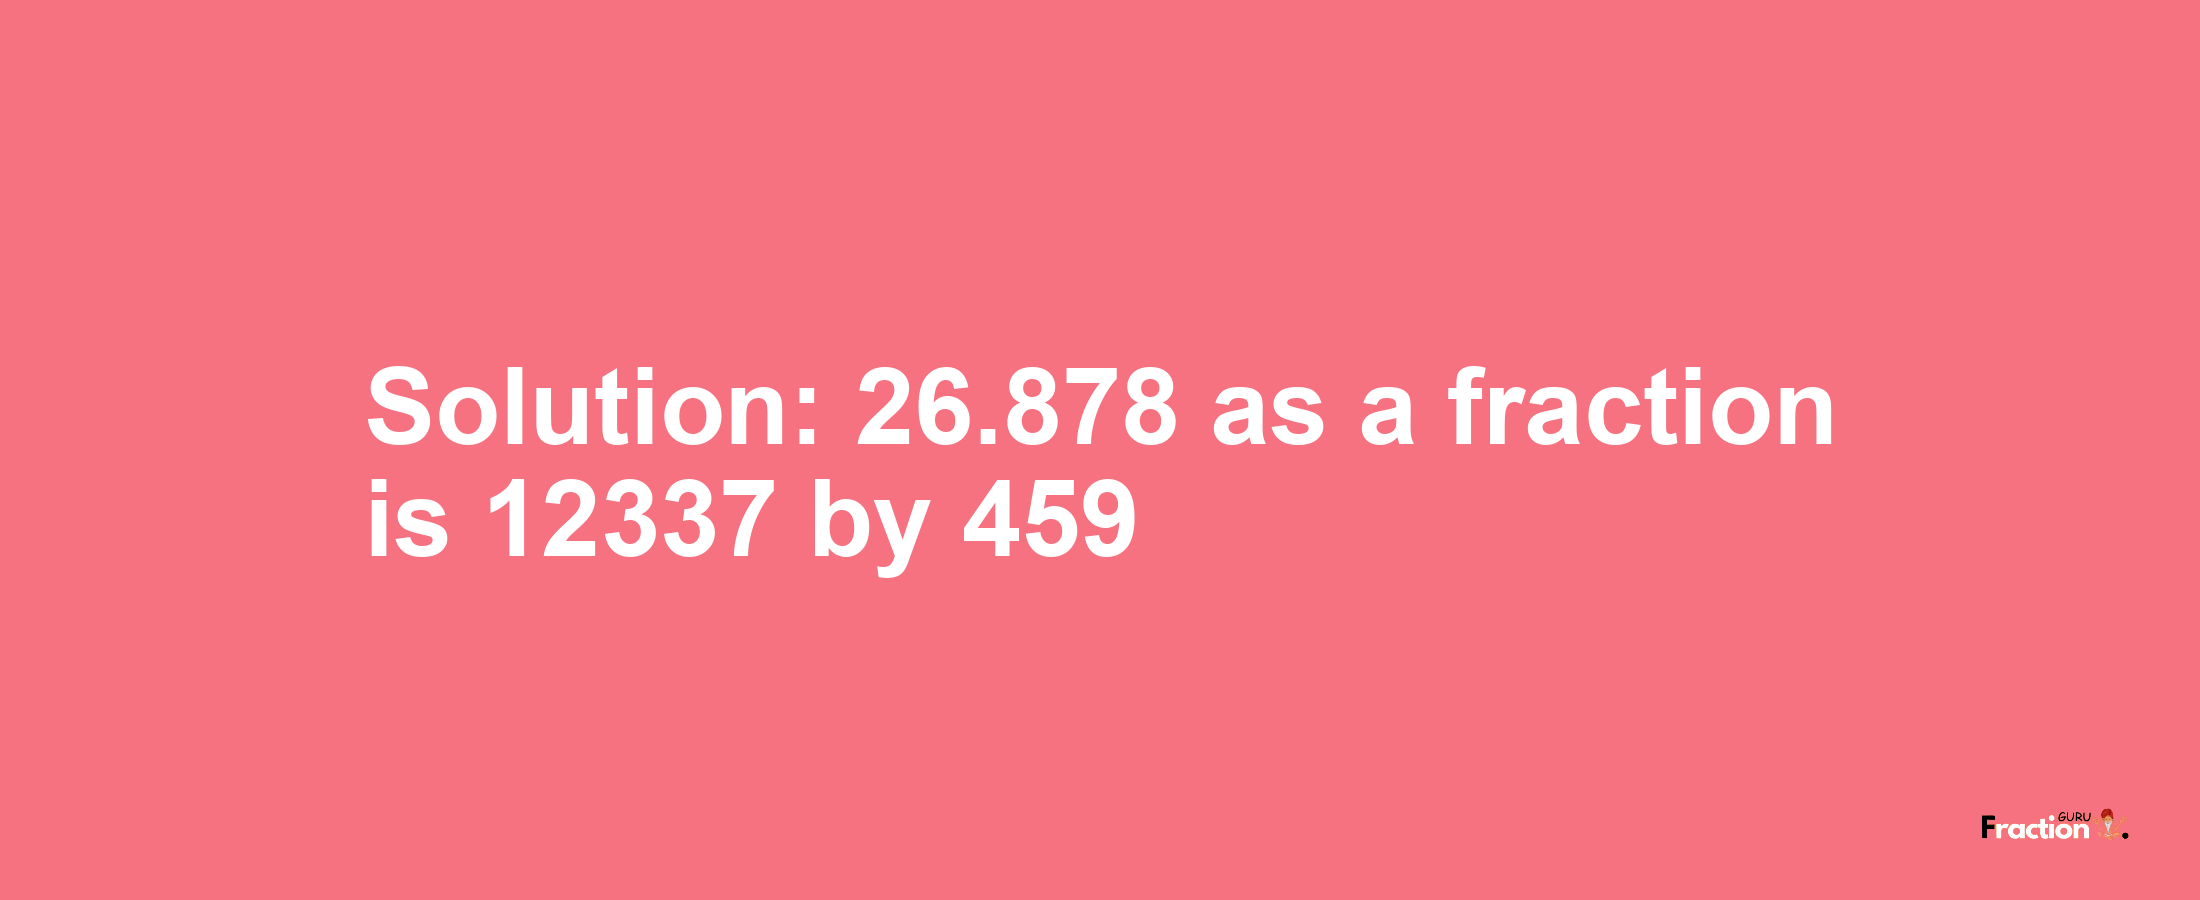 Solution:26.878 as a fraction is 12337/459